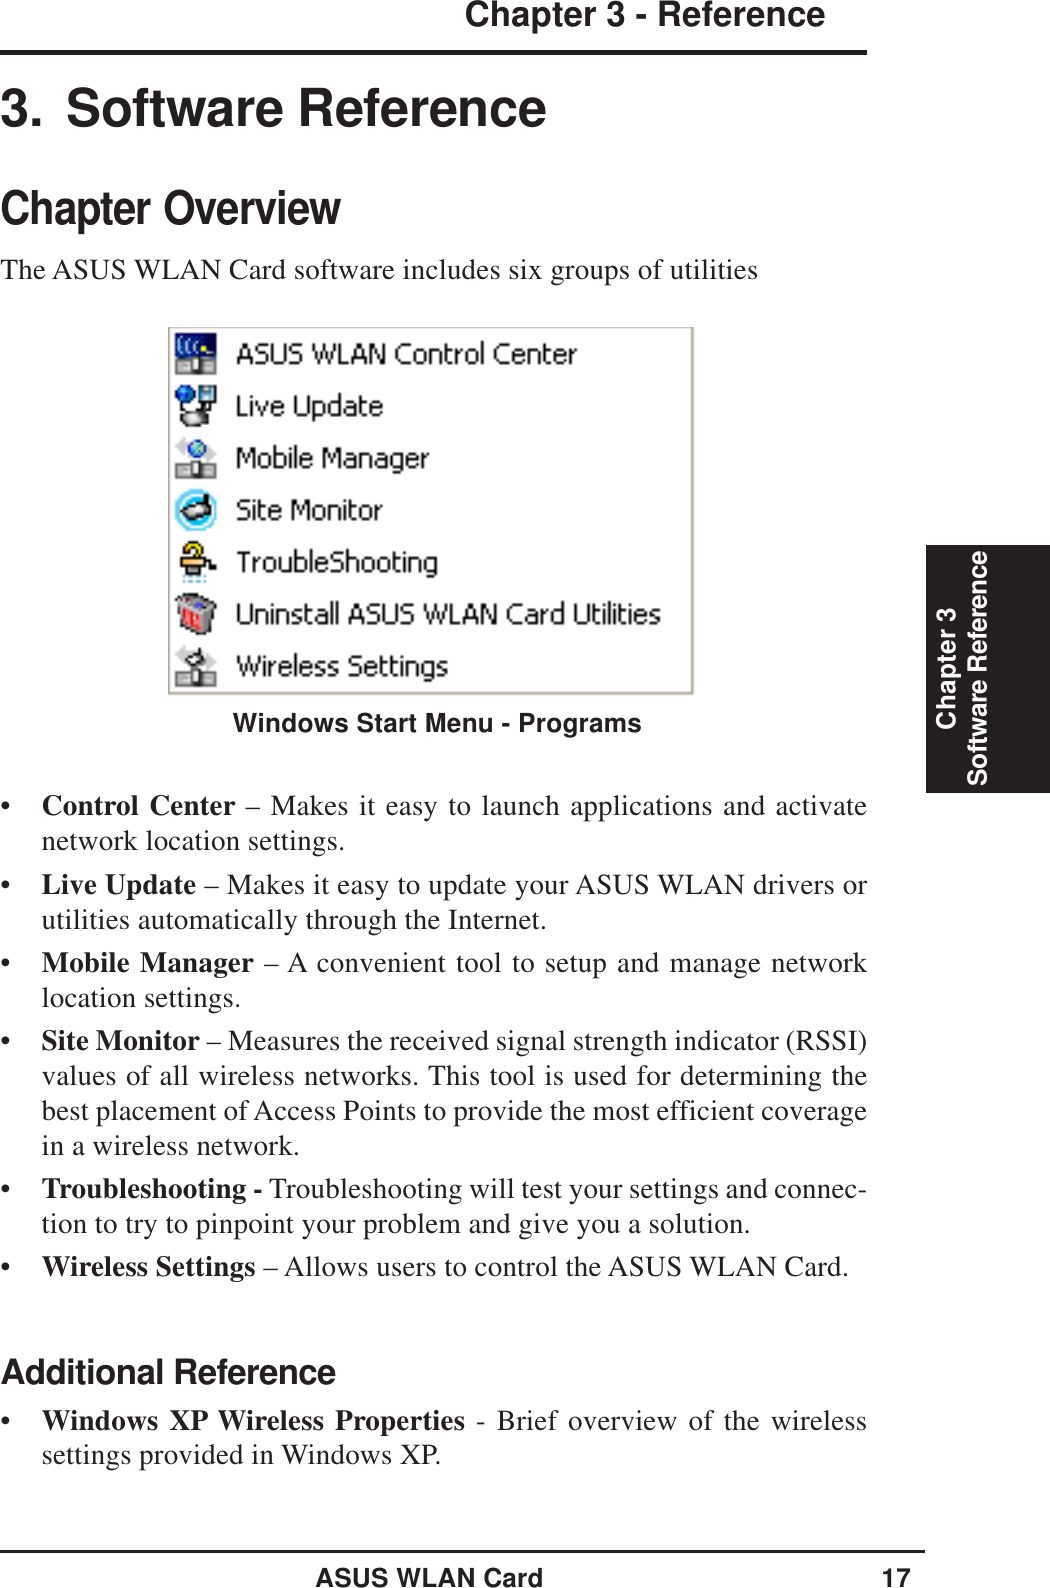 ASUS WLAN Card 17Chapter 3 - ReferenceChapter 3Software Reference•Control Center – Makes it easy to launch applications and activatenetwork location settings.•Live Update – Makes it easy to update your ASUS WLAN drivers orutilities automatically through the Internet.•Mobile Manager – A convenient tool to setup and manage networklocation settings.•Site Monitor – Measures the received signal strength indicator (RSSI)values of all wireless networks. This tool is used for determining thebest placement of Access Points to provide the most efficient coveragein a wireless network.•Troubleshooting - Troubleshooting will test your settings and connec-tion to try to pinpoint your problem and give you a solution.•Wireless Settings – Allows users to control the ASUS WLAN Card.Additional Reference•Windows XP Wireless Properties - Brief overview of the wirelesssettings provided in Windows XP.3. Software ReferenceChapter OverviewThe ASUS WLAN Card software includes six groups of utilitiesWindows Start Menu - Programs